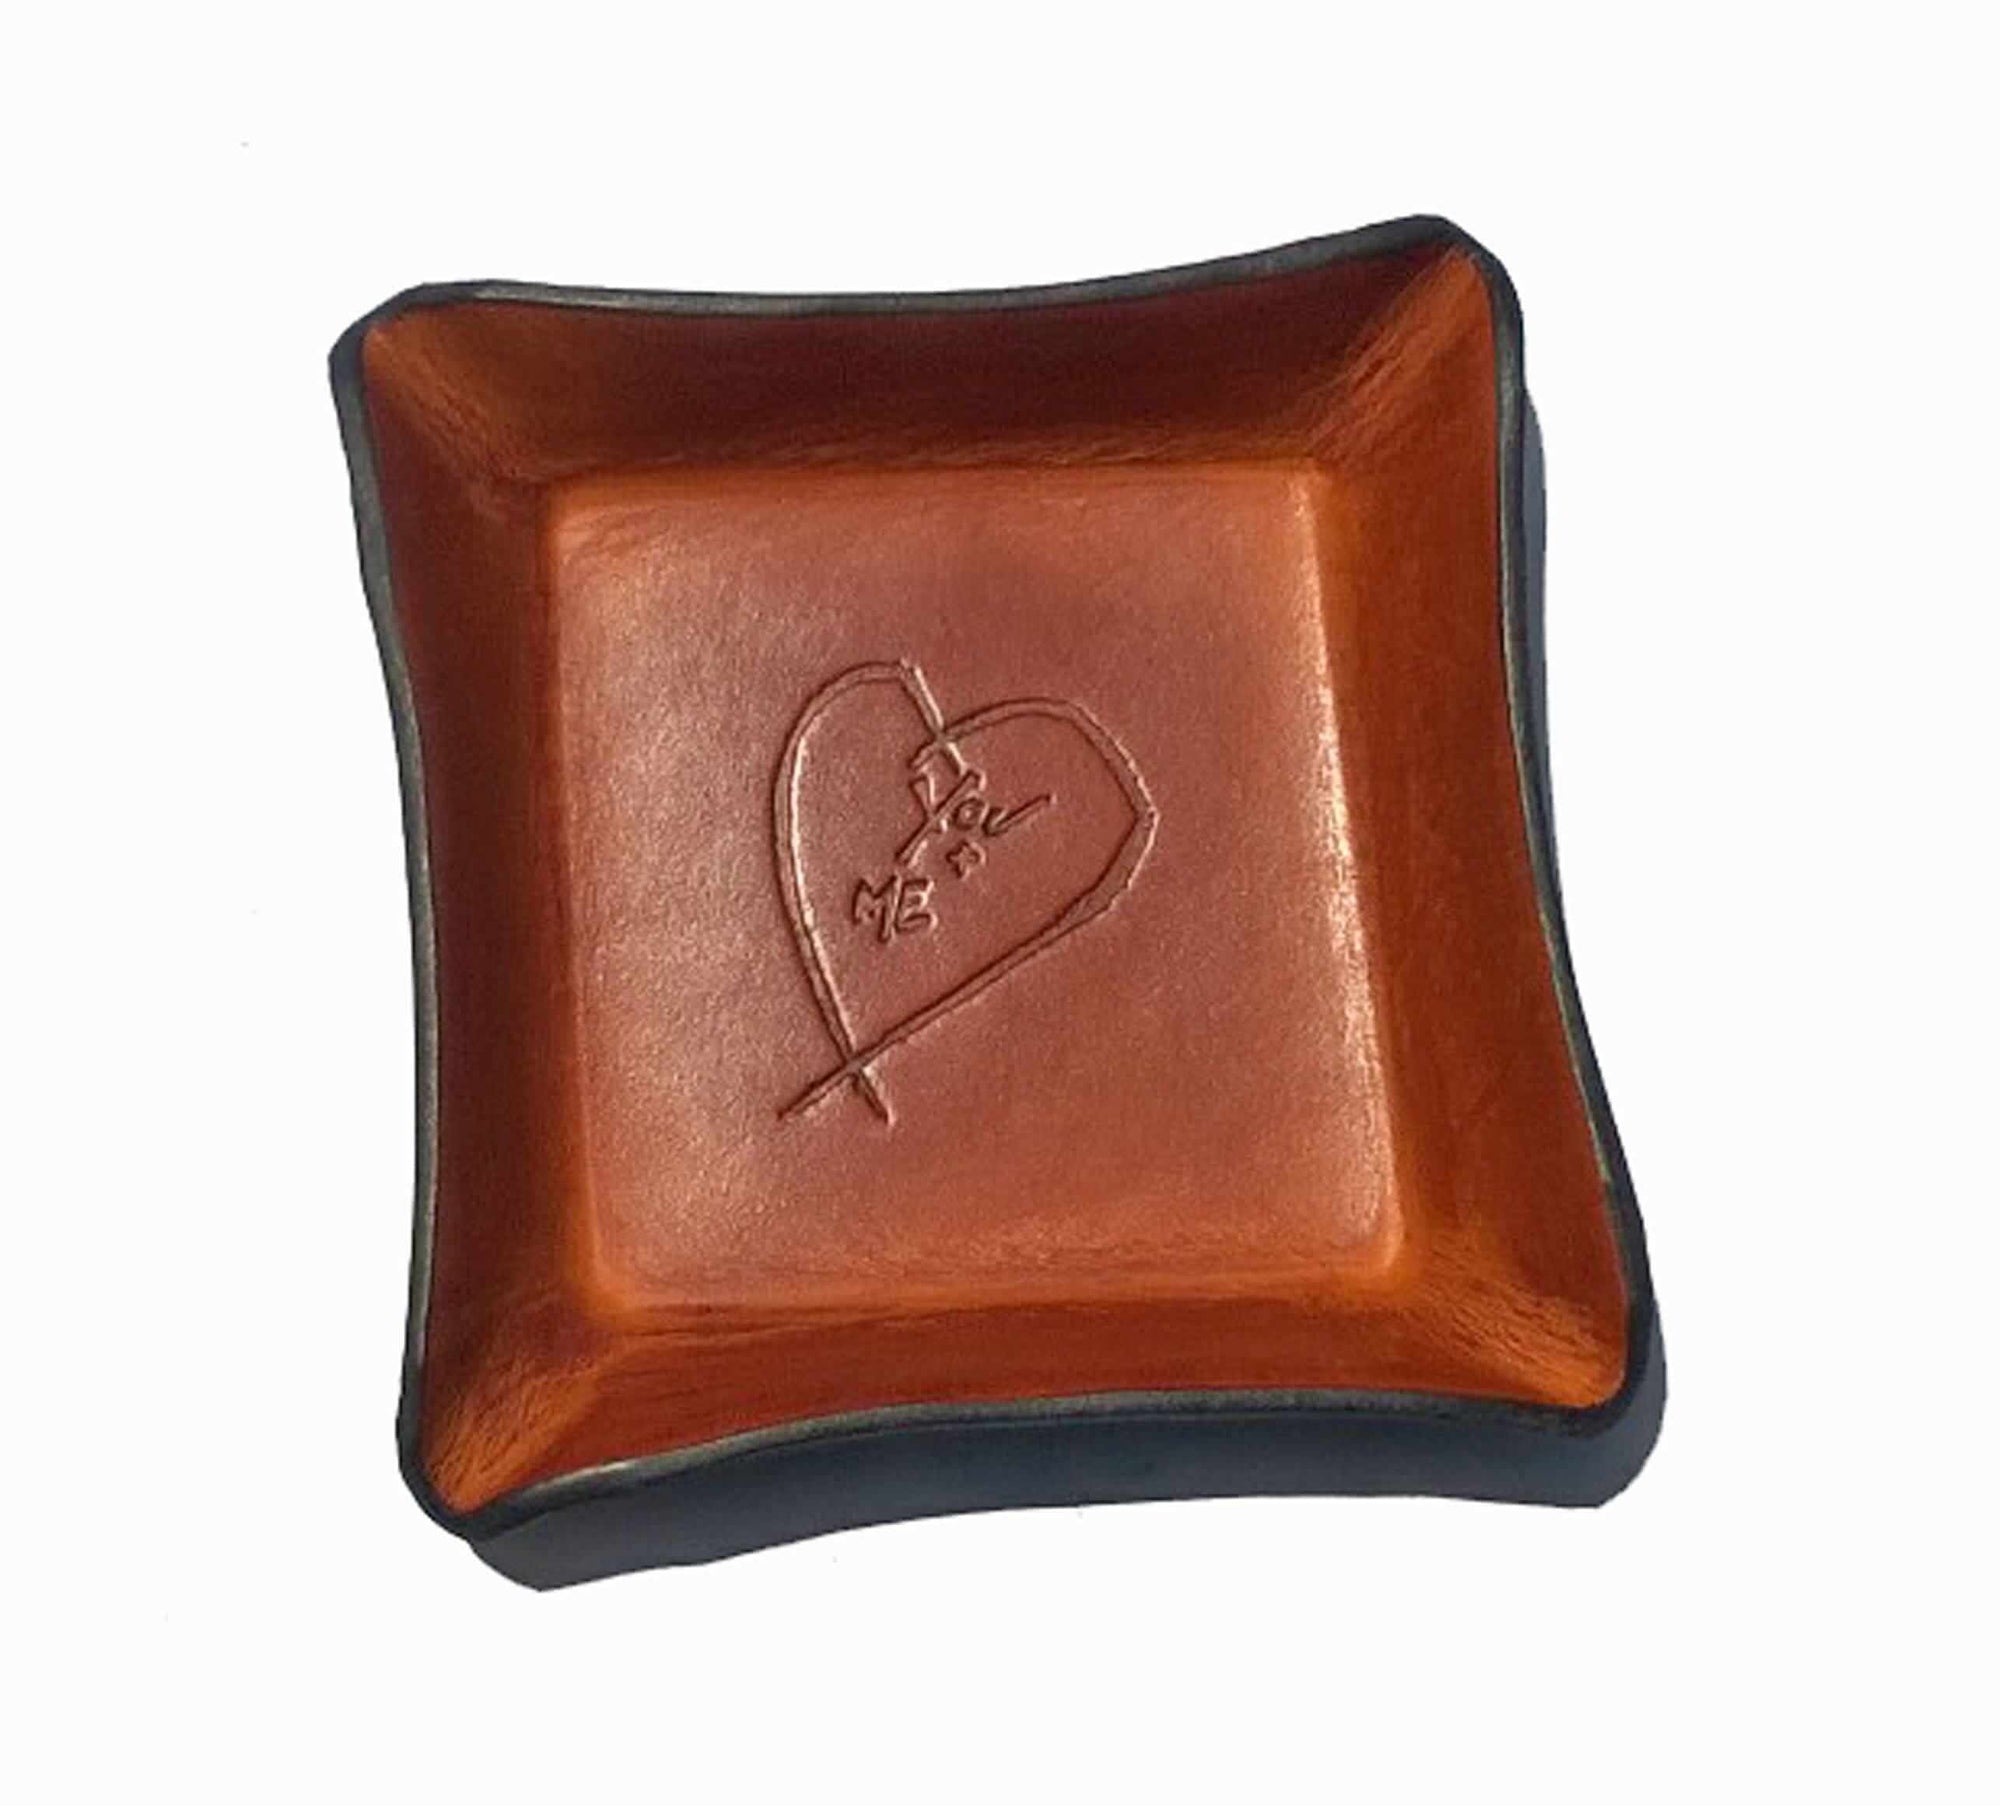 Distressed tan leather tray with heart image.  3rd anniversary gift.